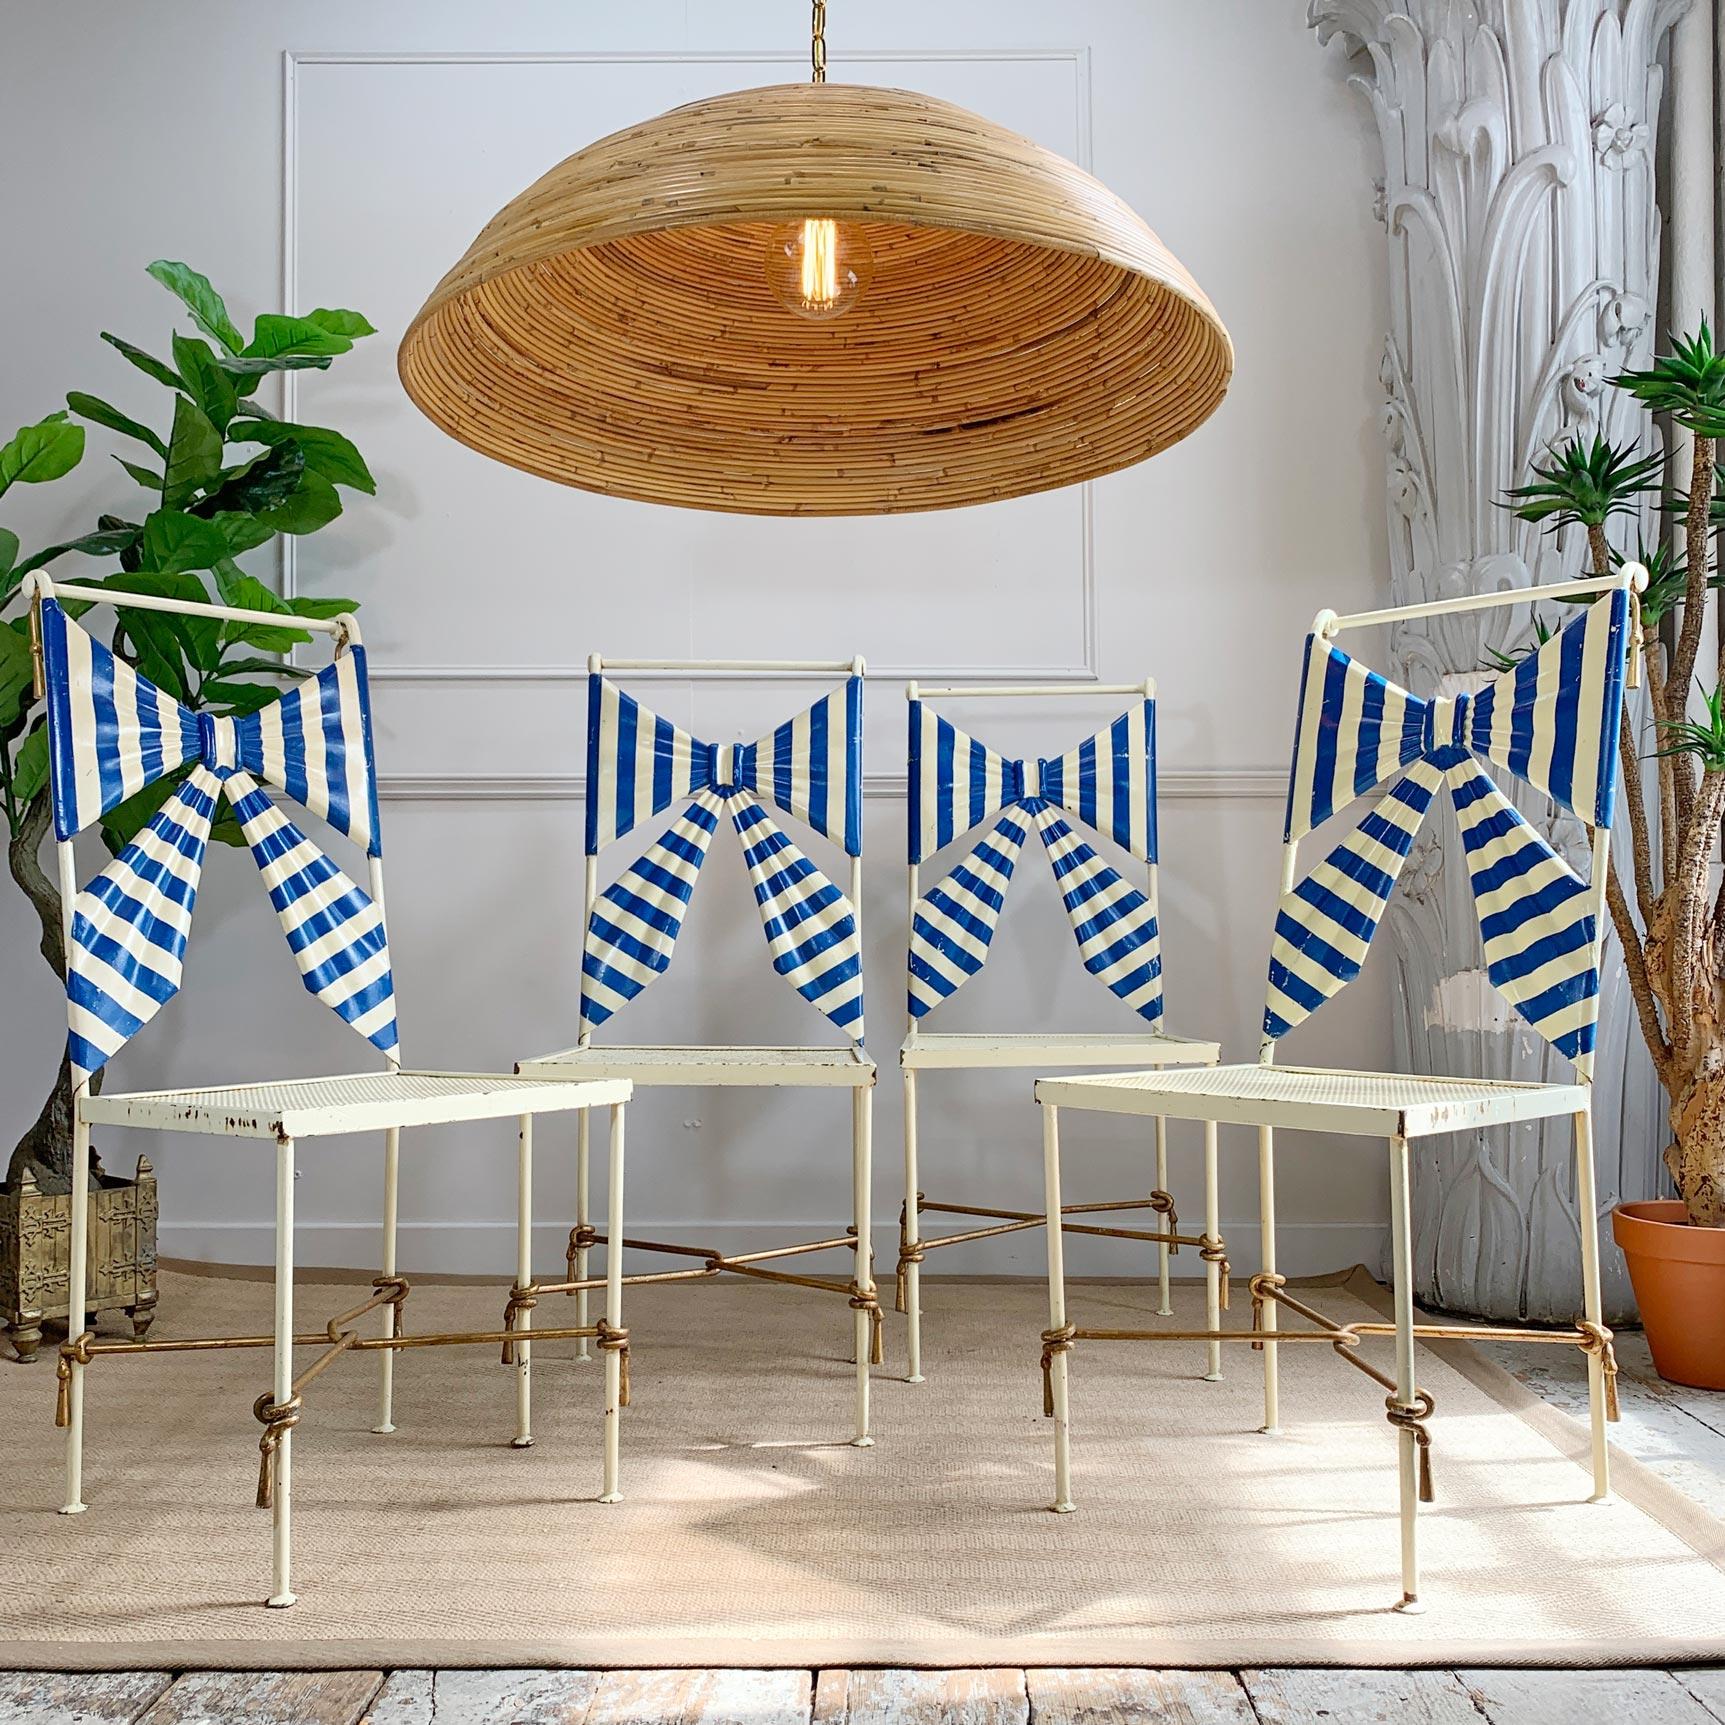 A fabulous set of four wrought iron 1950's Italian tole chairs, with hand painted blue and white rippled 3 dimensional bow back rests, gilt faux tassel decoration and perforate seats. This beautiful set of seats is incredibly rare and were most